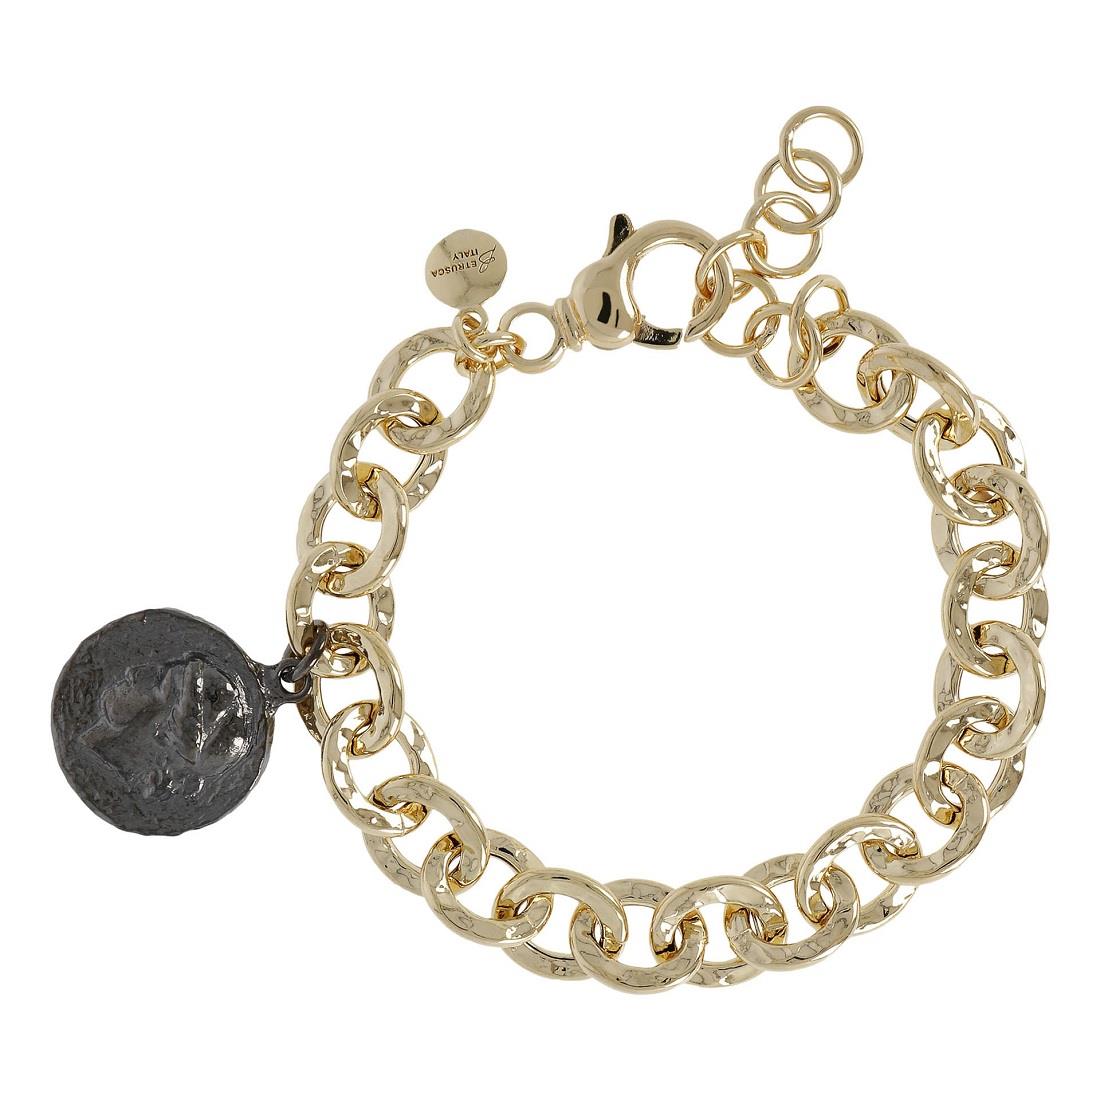 Gold plated bracelet with charms - TOSCANA BY ETRUSCA